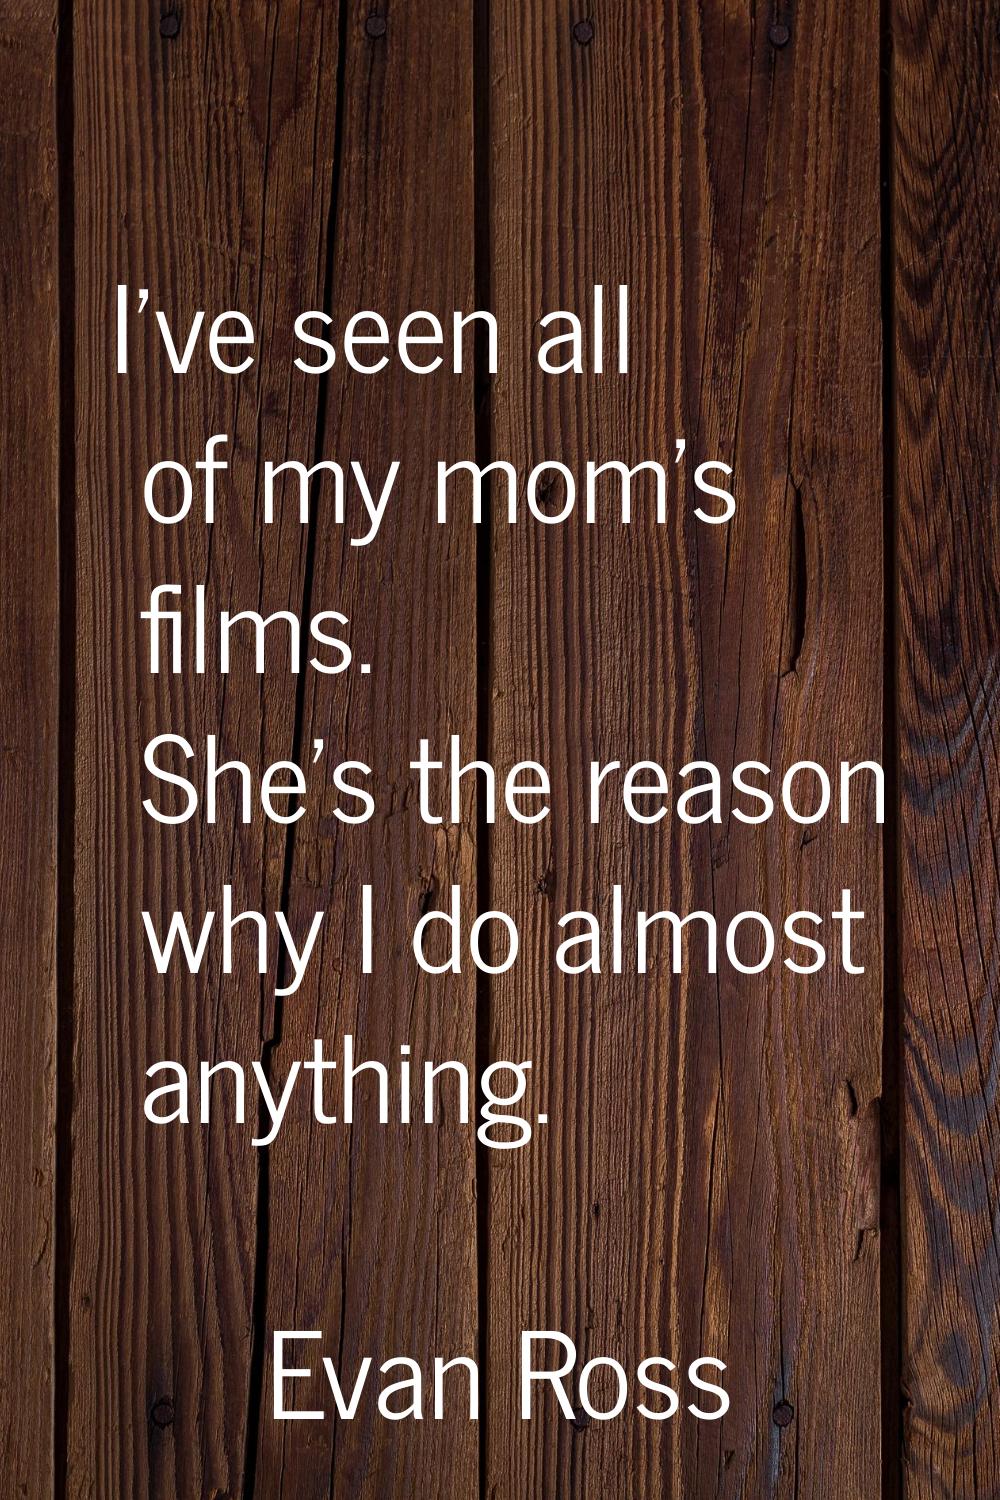 I've seen all of my mom's films. She's the reason why I do almost anything.